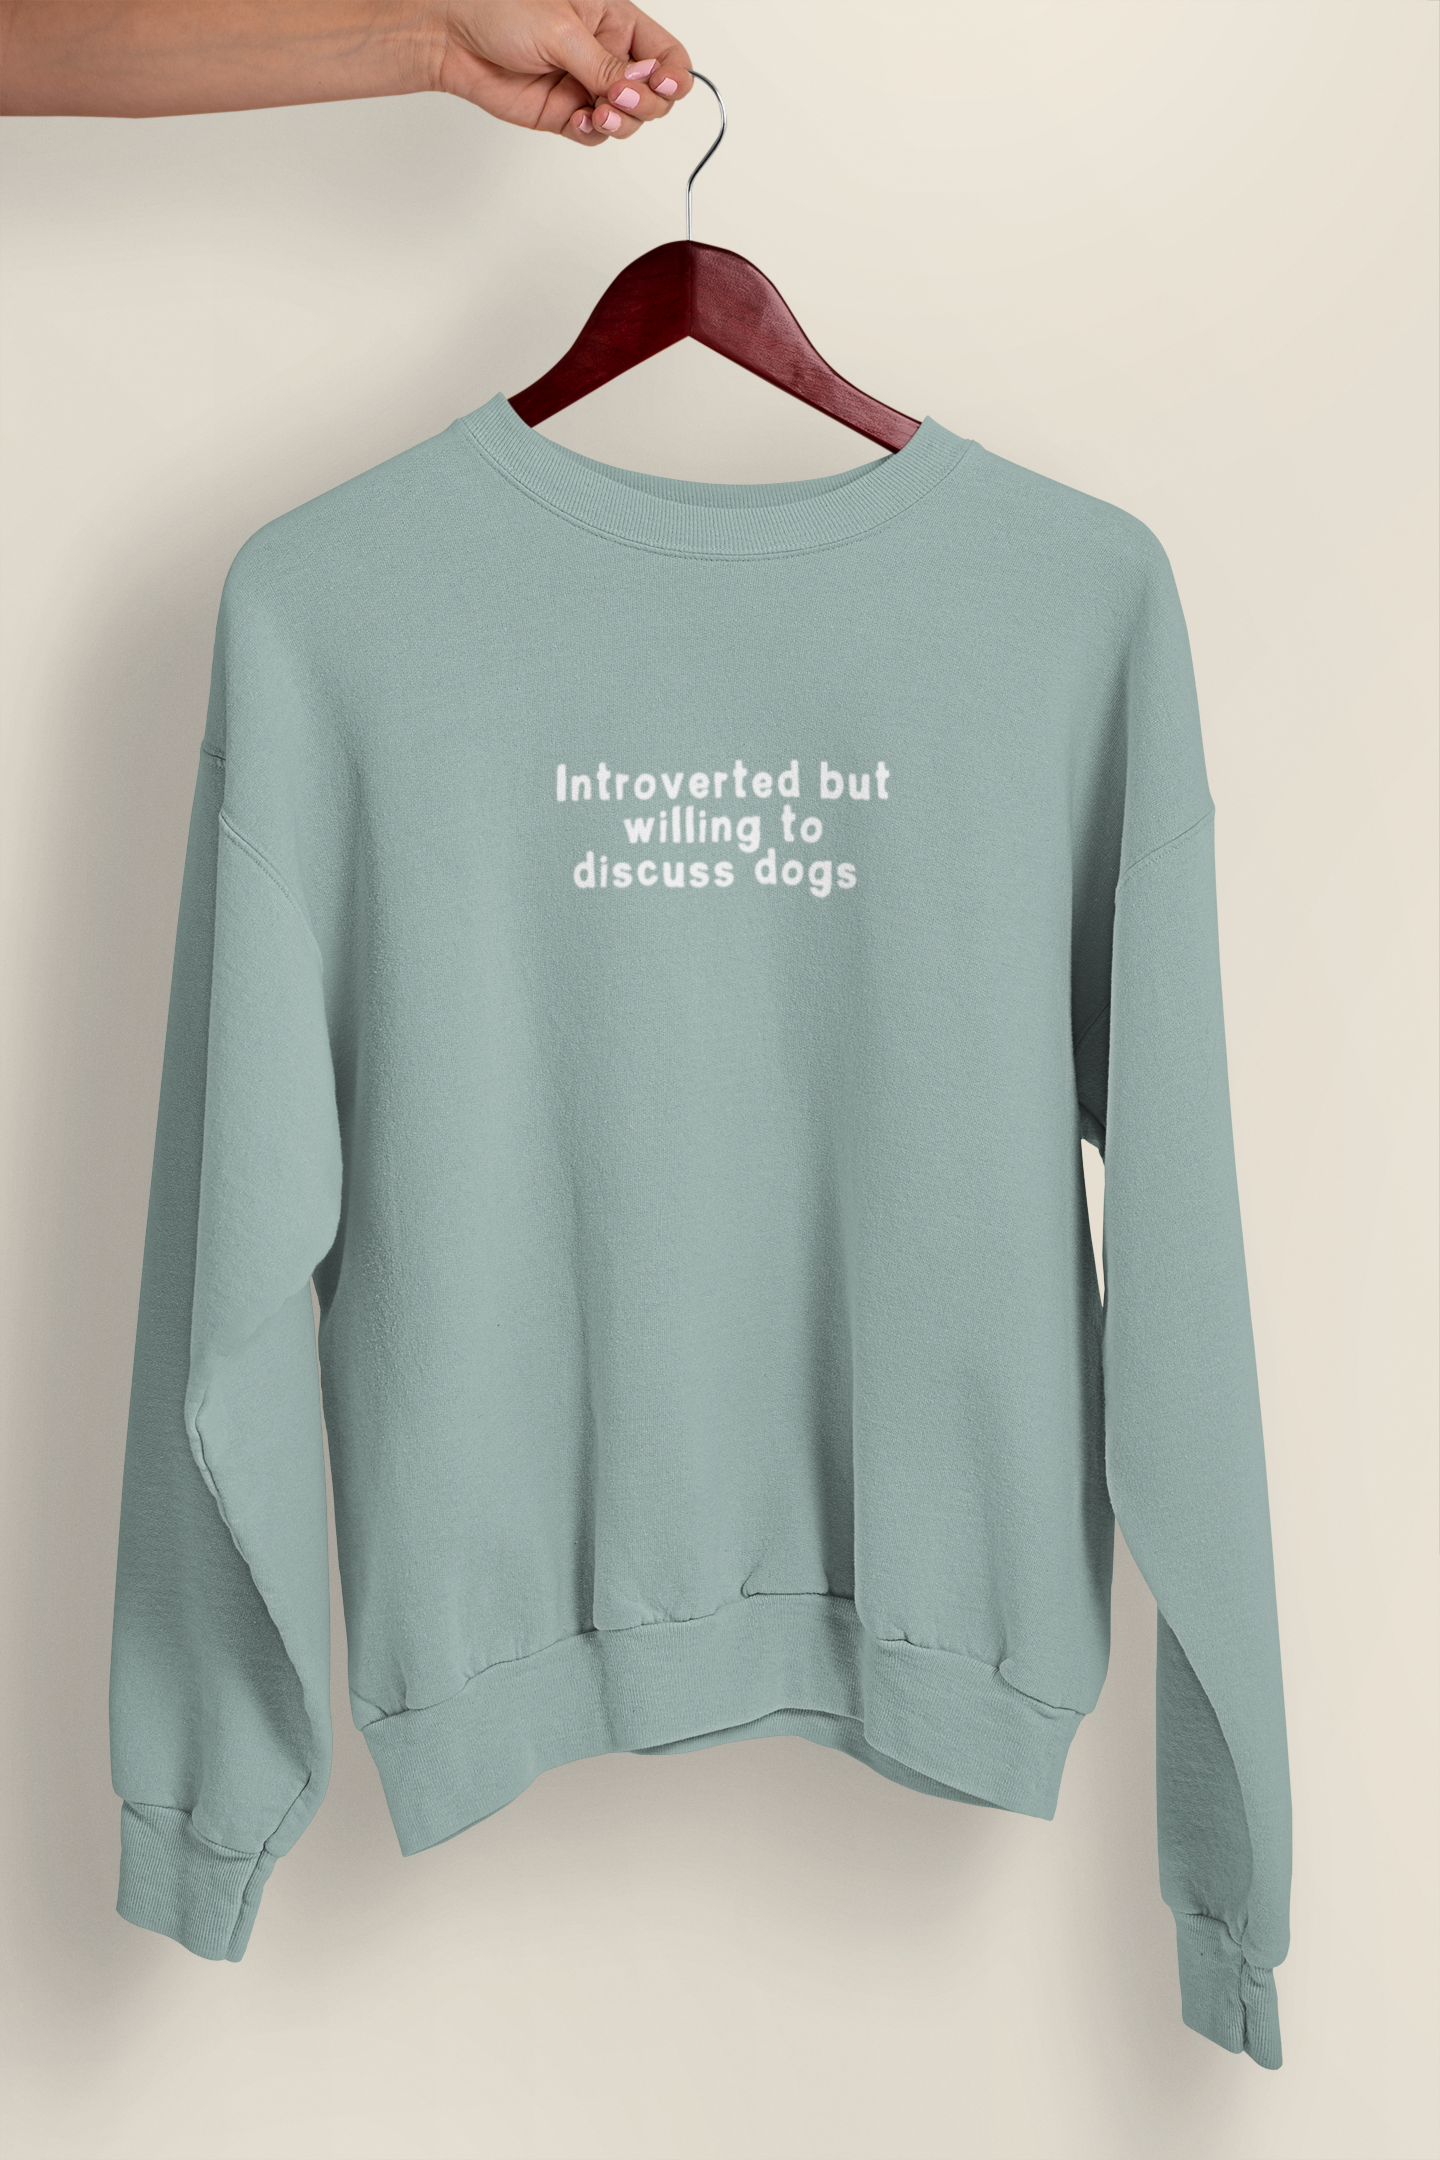 Embroidered | Introverted But Willing To Discuss Dogs | Unisex Sweatshirt